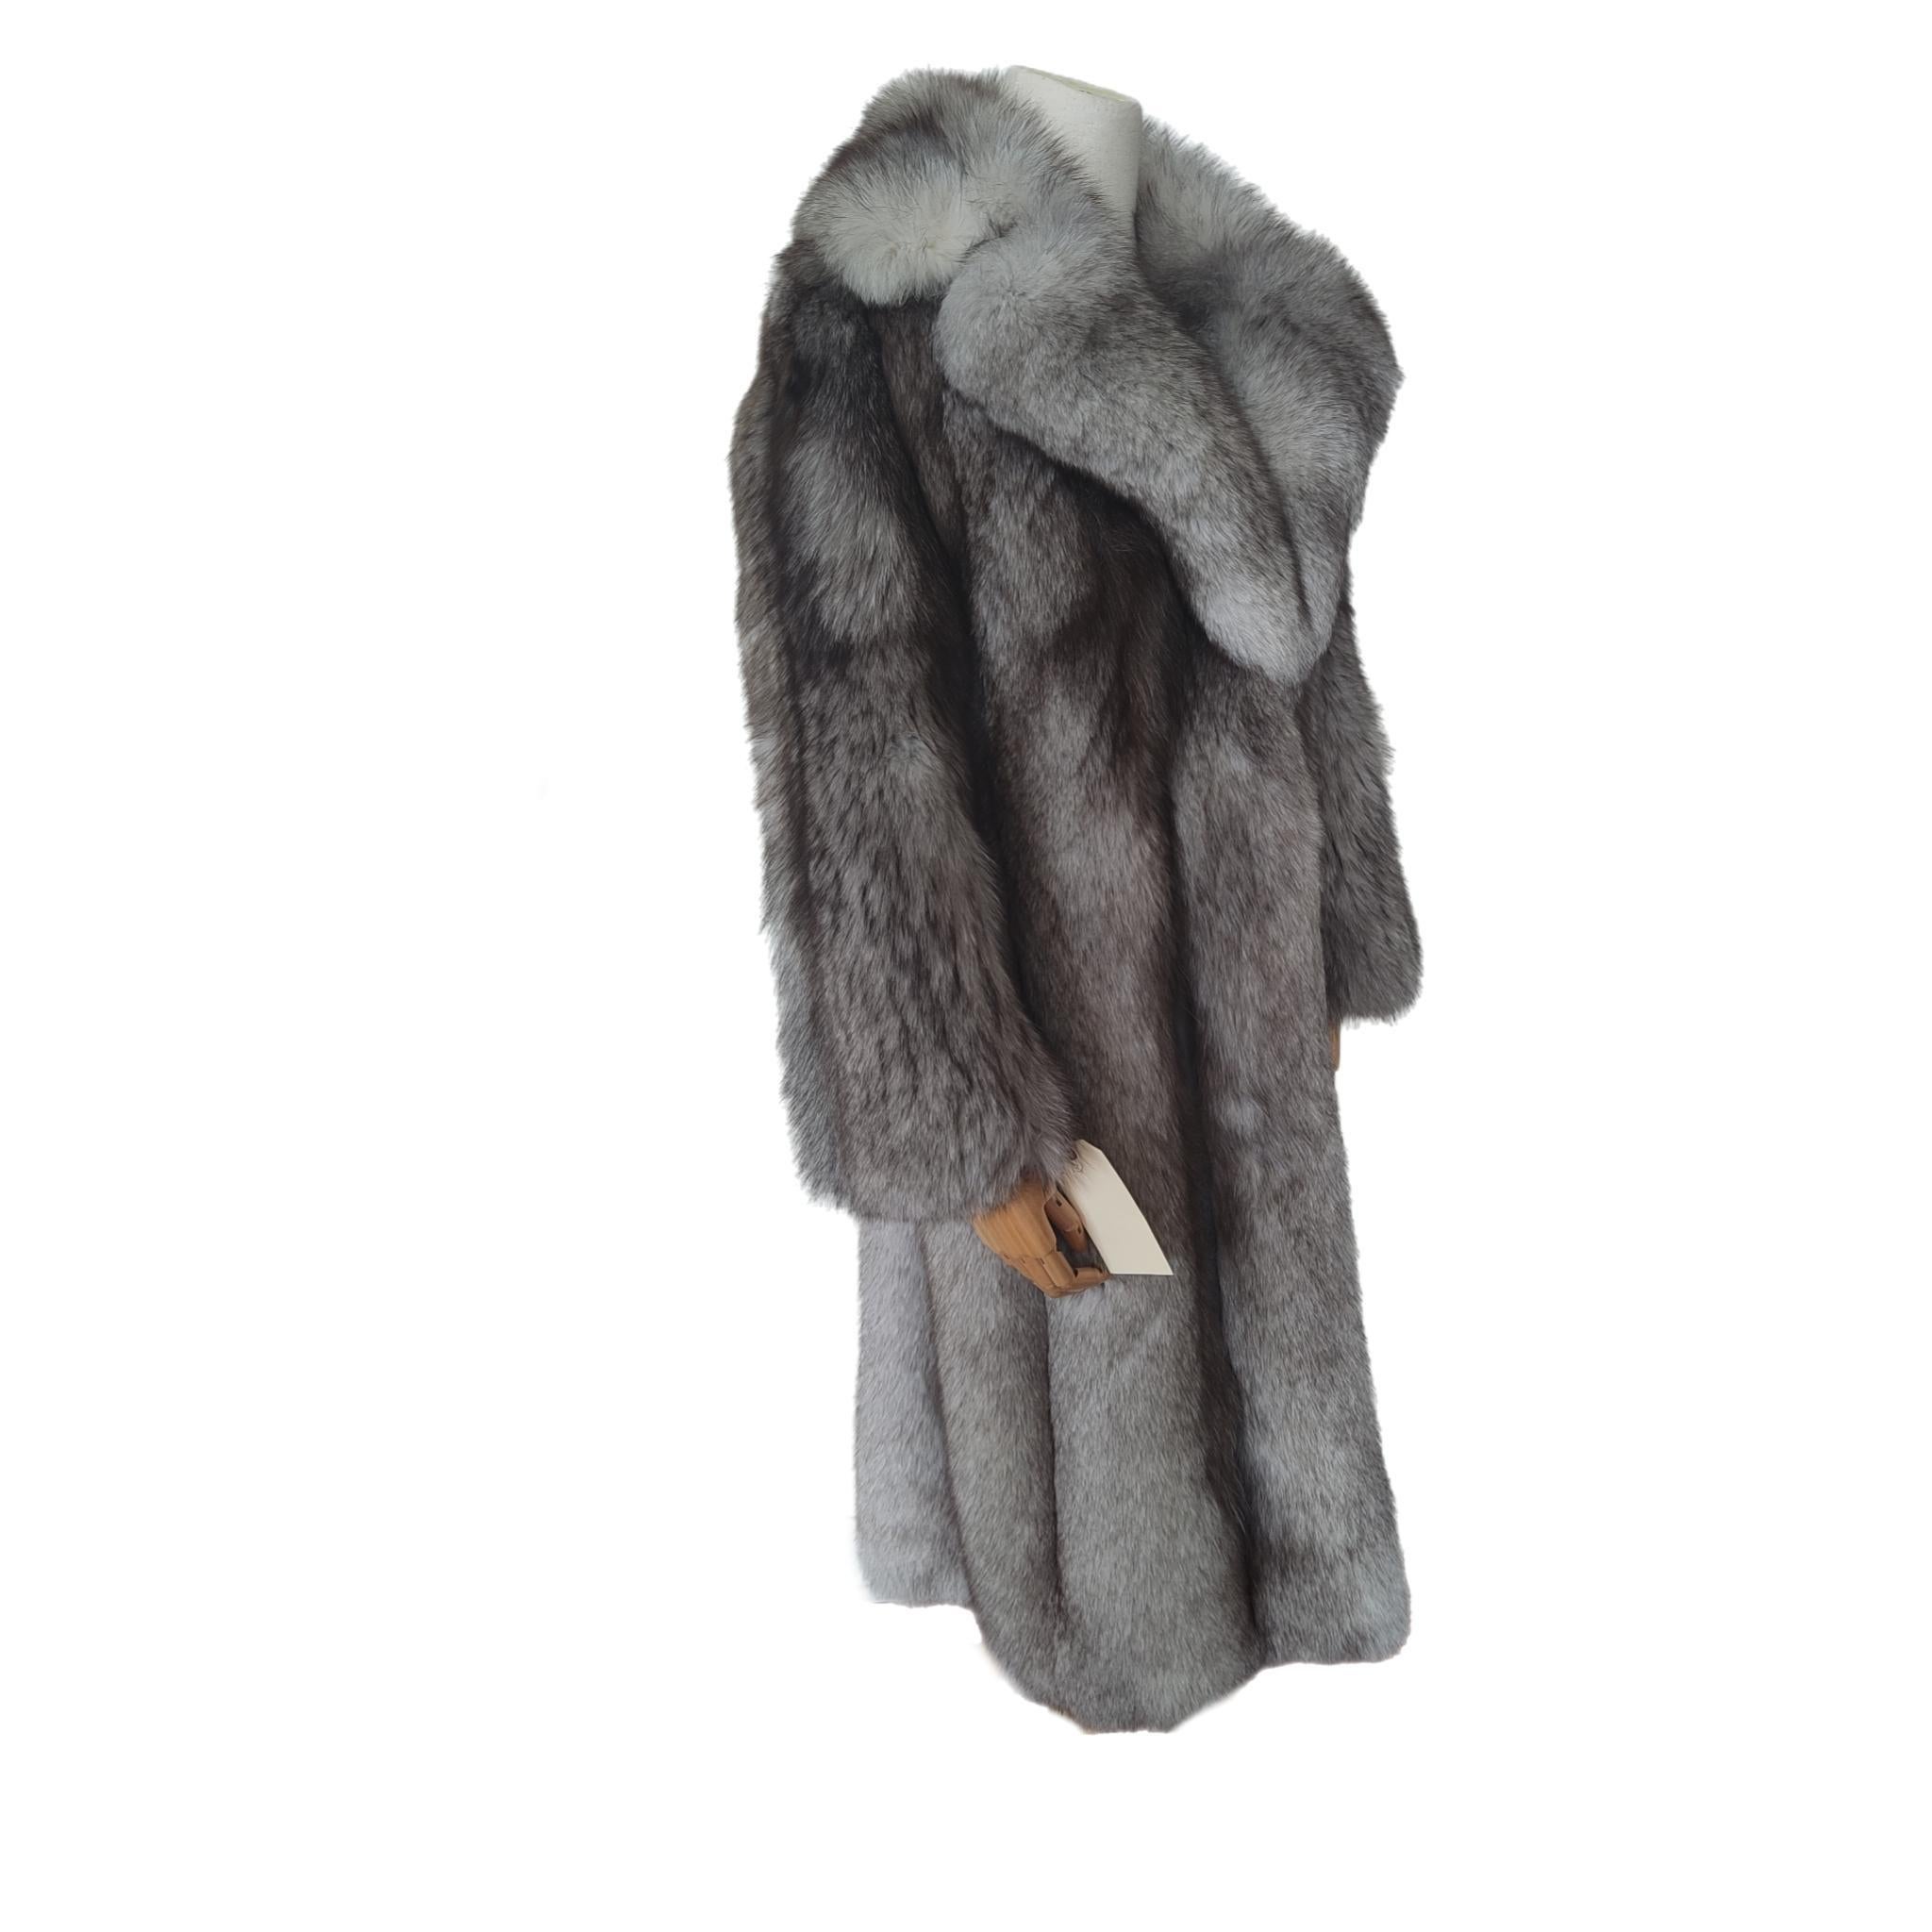 ~ Vintage Brand new Rare Norwegian Fox Fur Coat  (Size 6-S) 

When it comes to fur, Canada Majestic is the ultimate reference in quality and style. This stunning Norwegian  fox coat is a rare find classic with the notch collar. It has a full skin